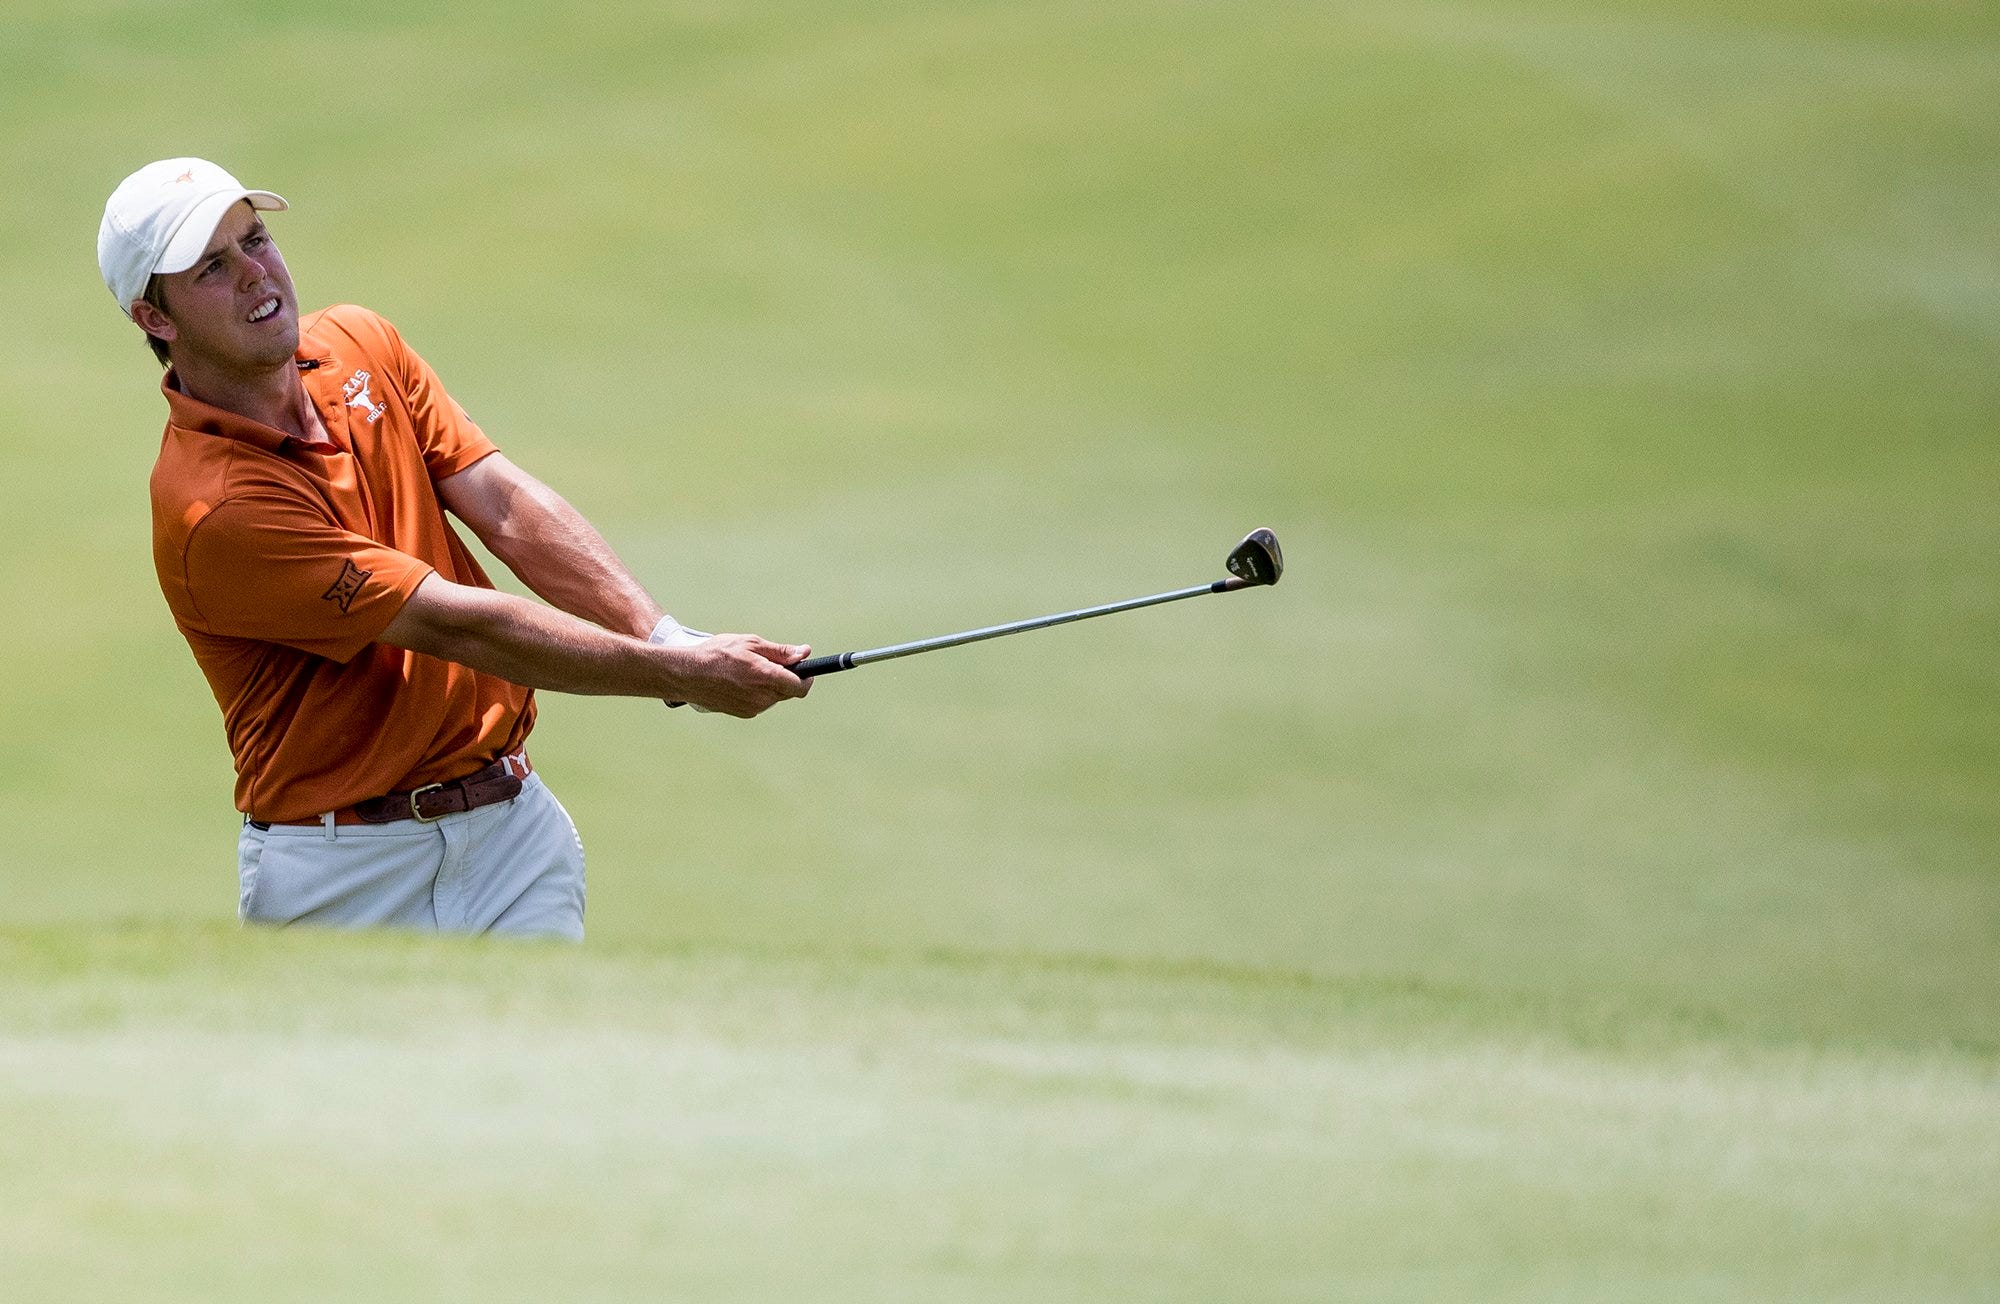 Bohls Longhorn Pierceson Coody Latest In Long Line Of Great Texas Golfers